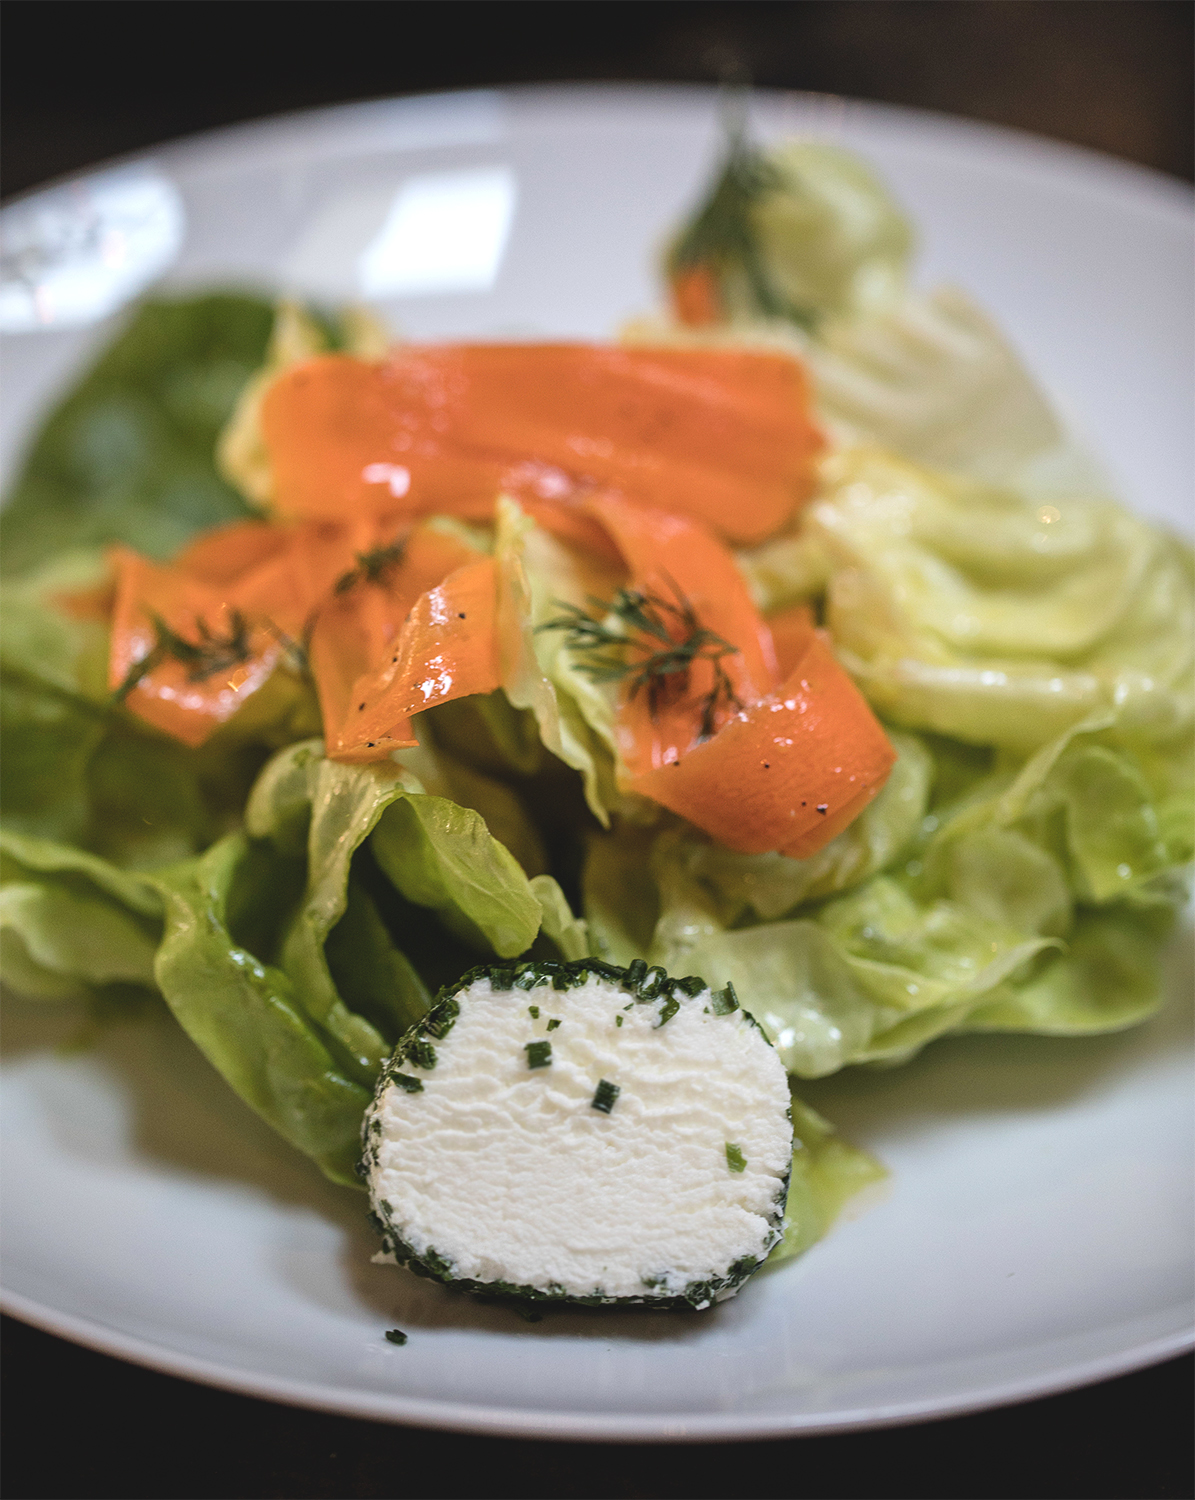 Bibb lettuce salad with carrot, red onion, herb cheese, and dill